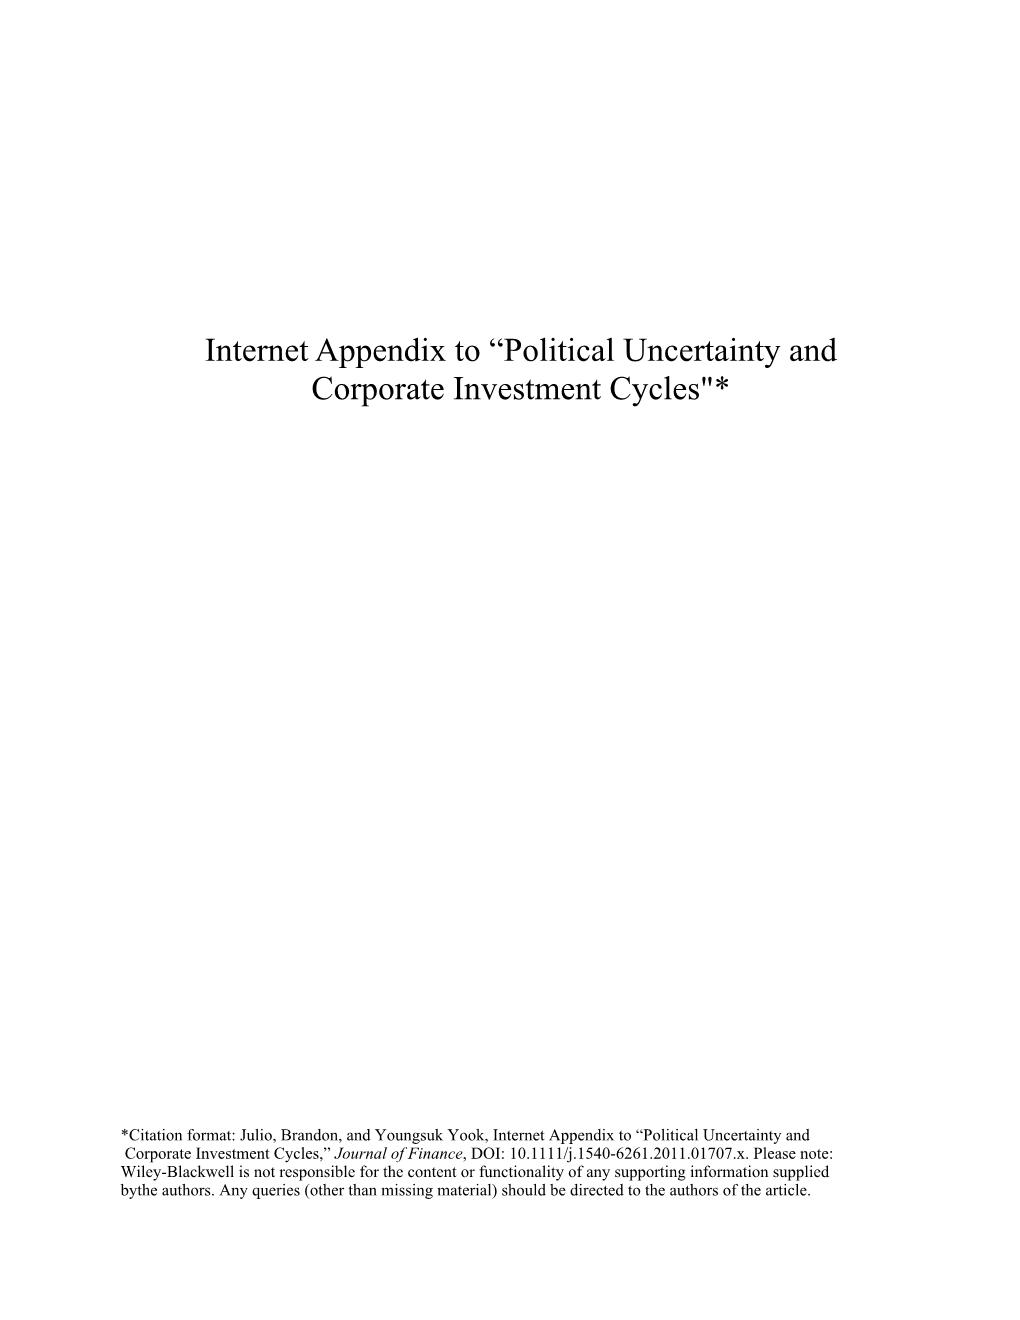 Internet Appendix to “Political Uncertainty and Corporate Investment Cycles"*